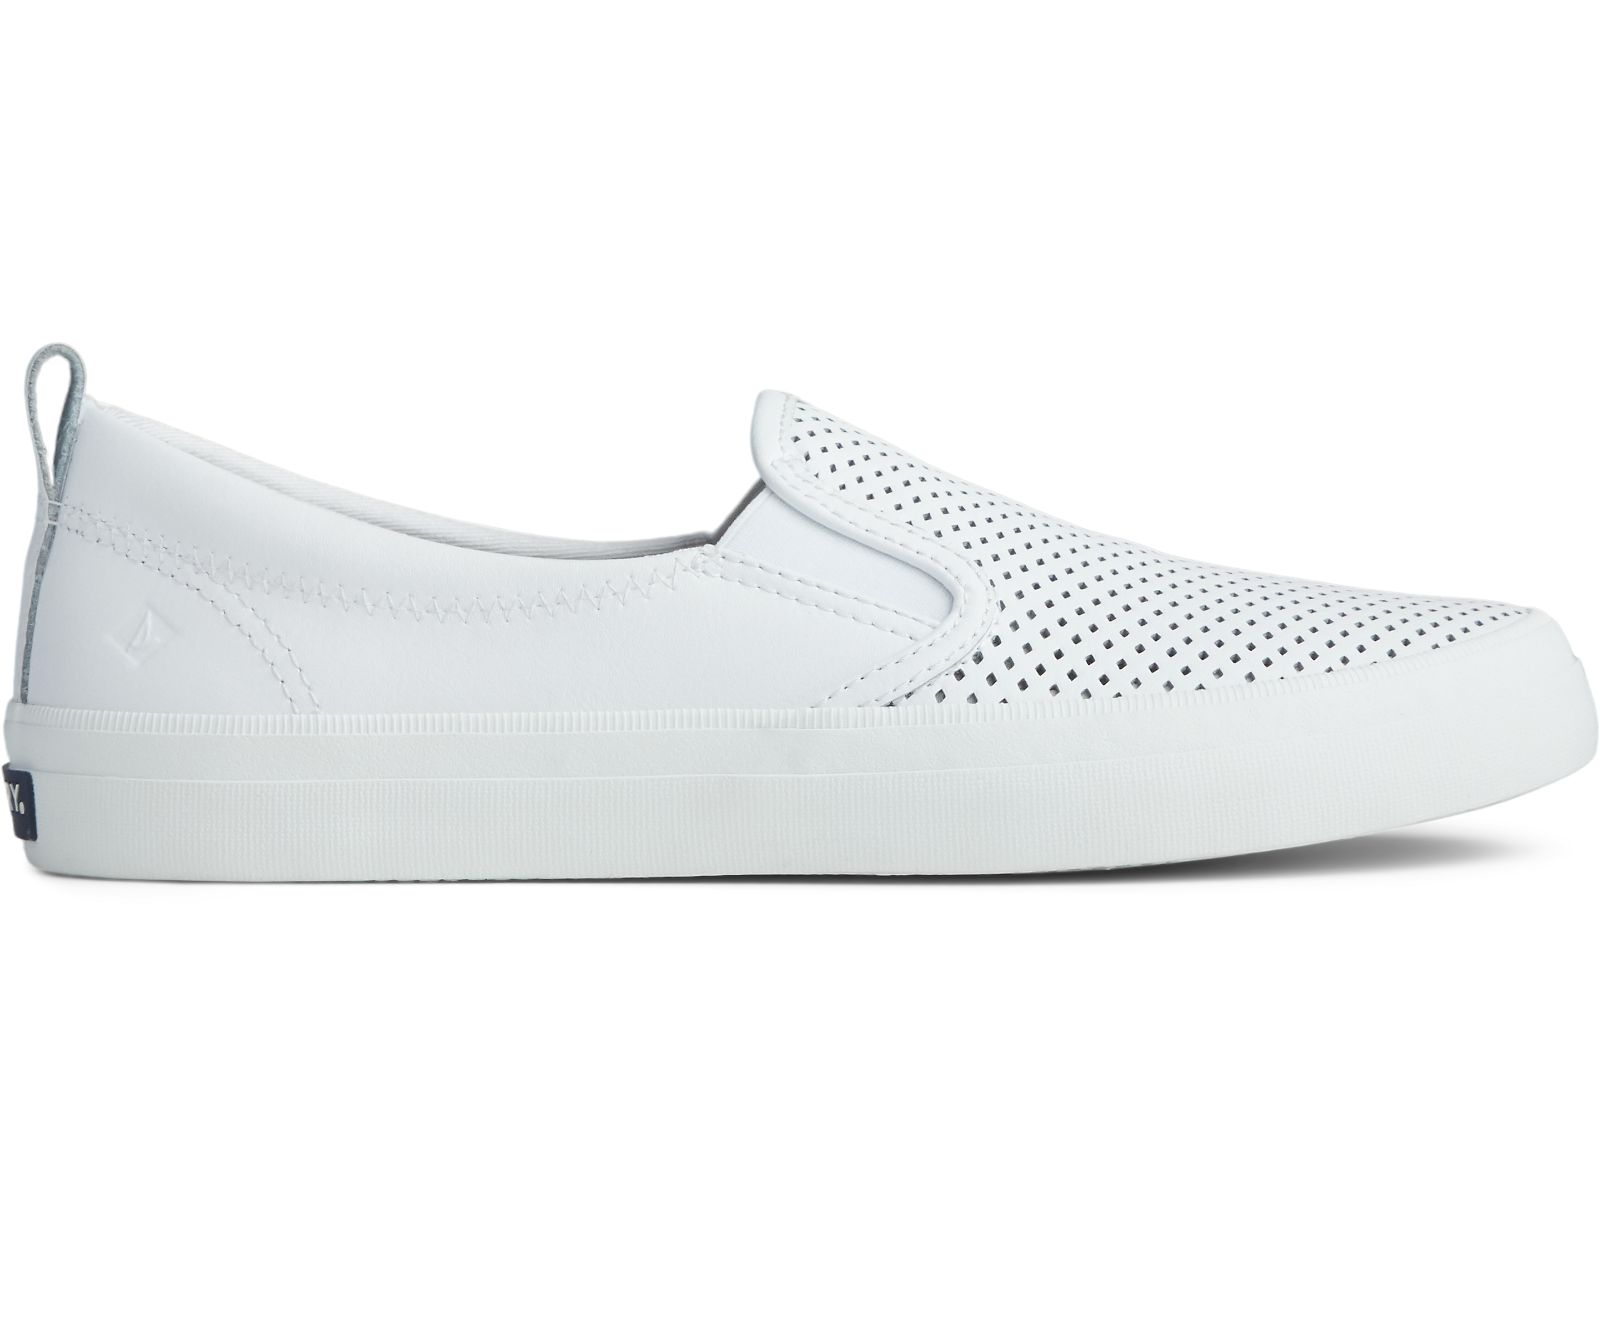 Women's Crest Twin Gore Perforated Slip On Sneaker - White